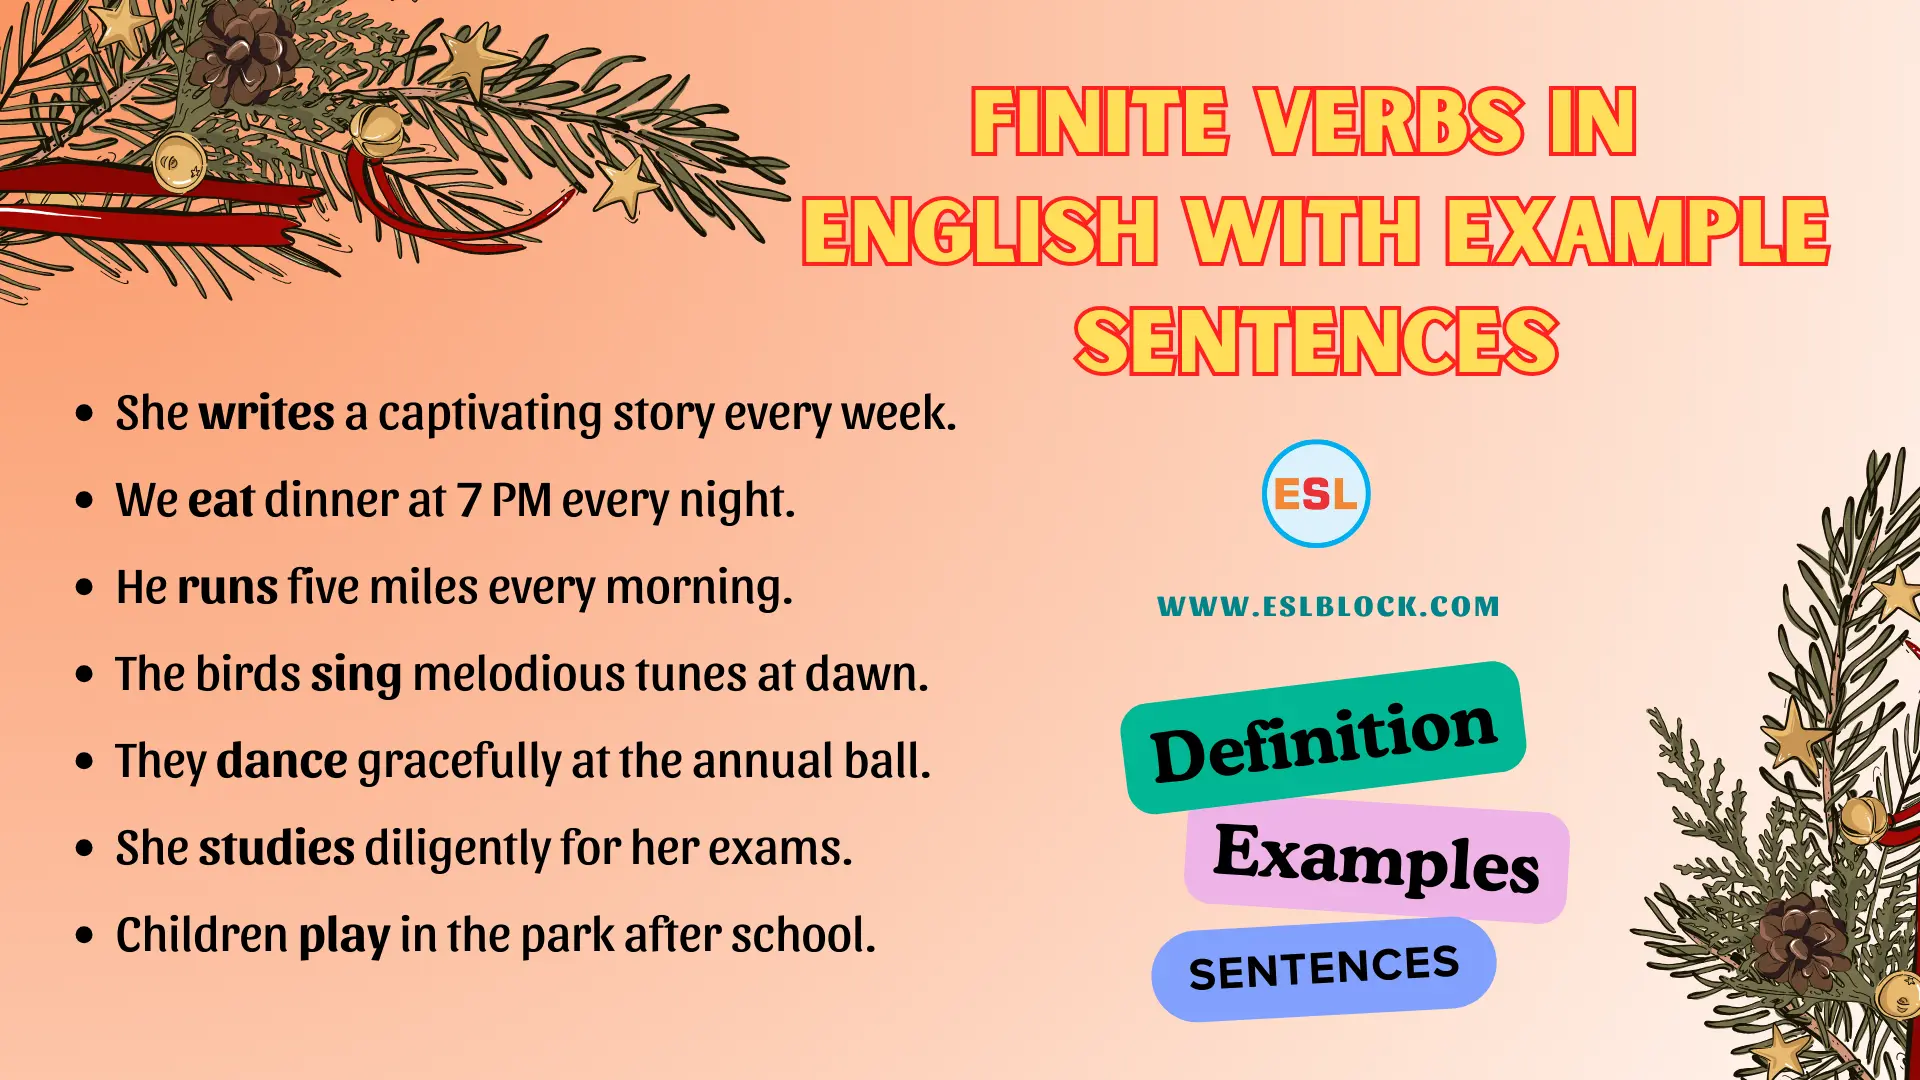 Finite Verbs in English with Example Sentences